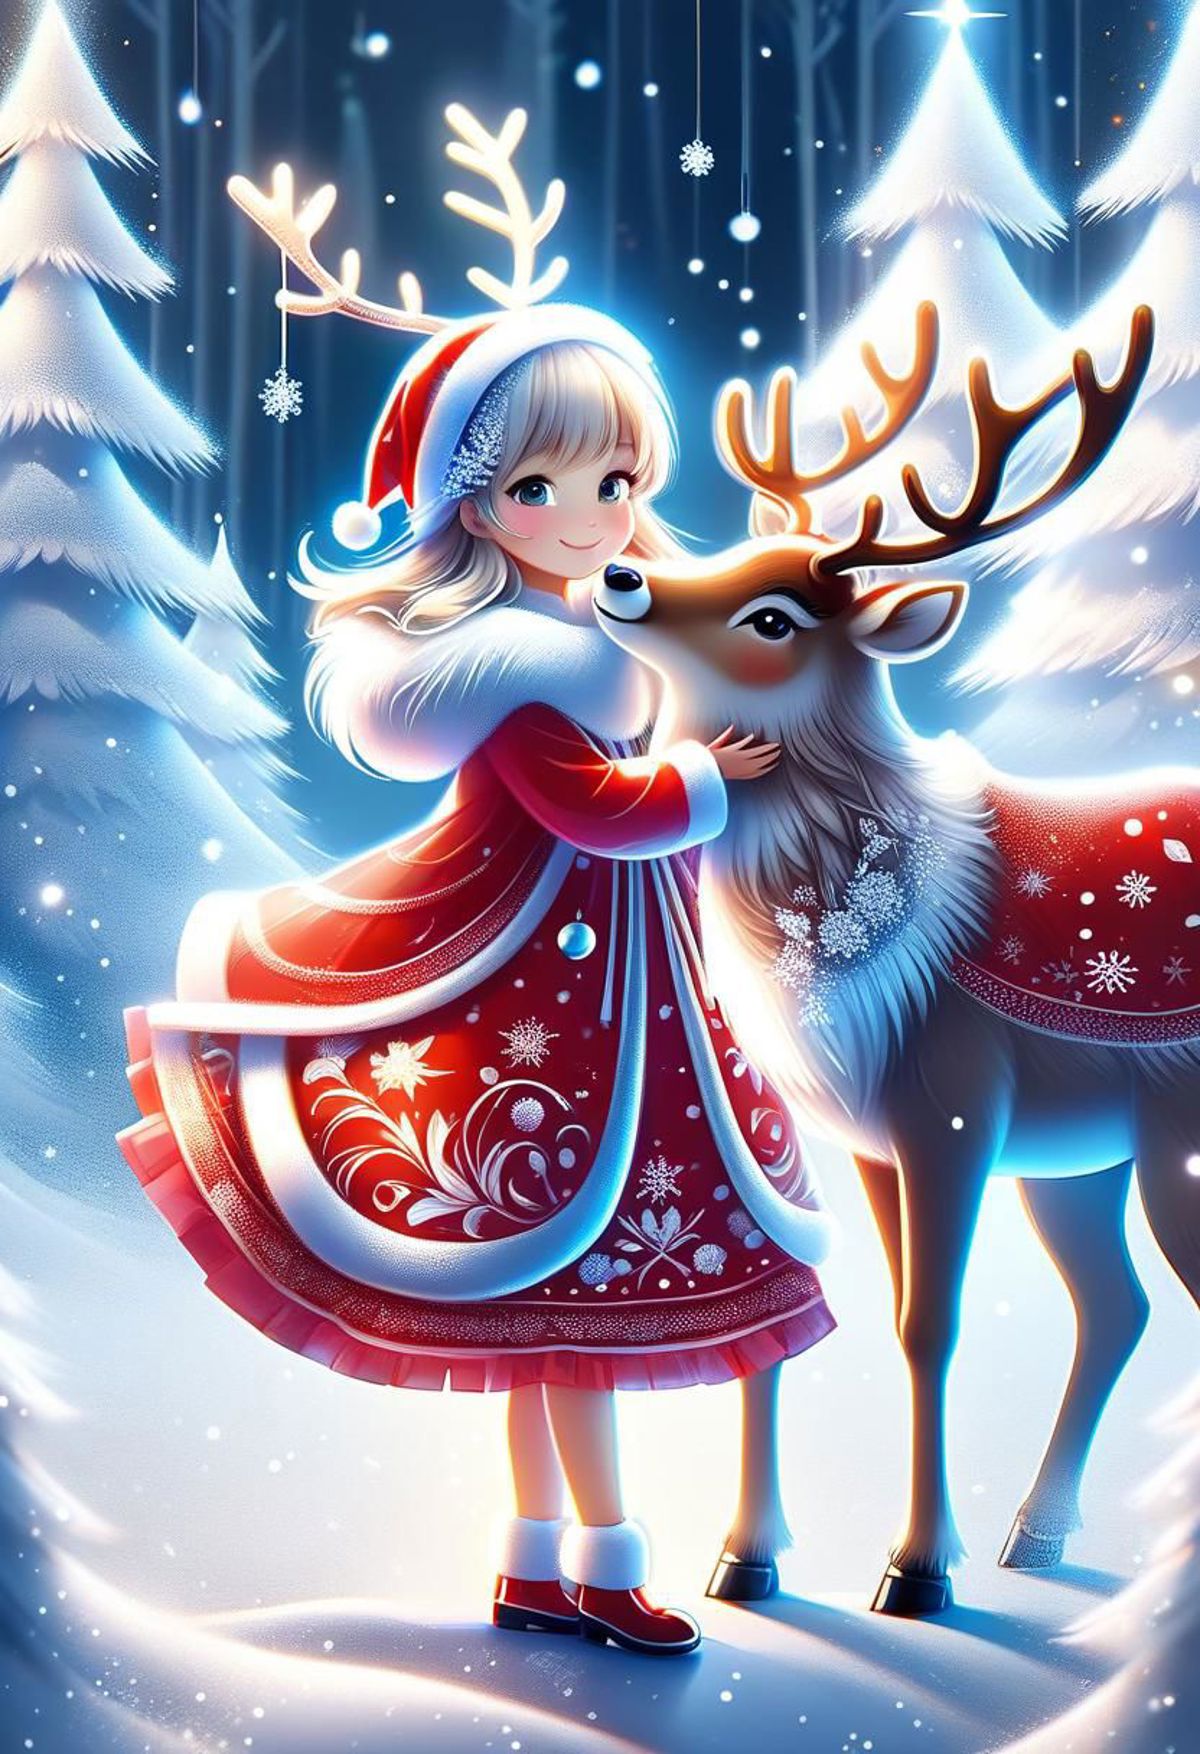 A little girl posing with a reindeer in a snowy scene.